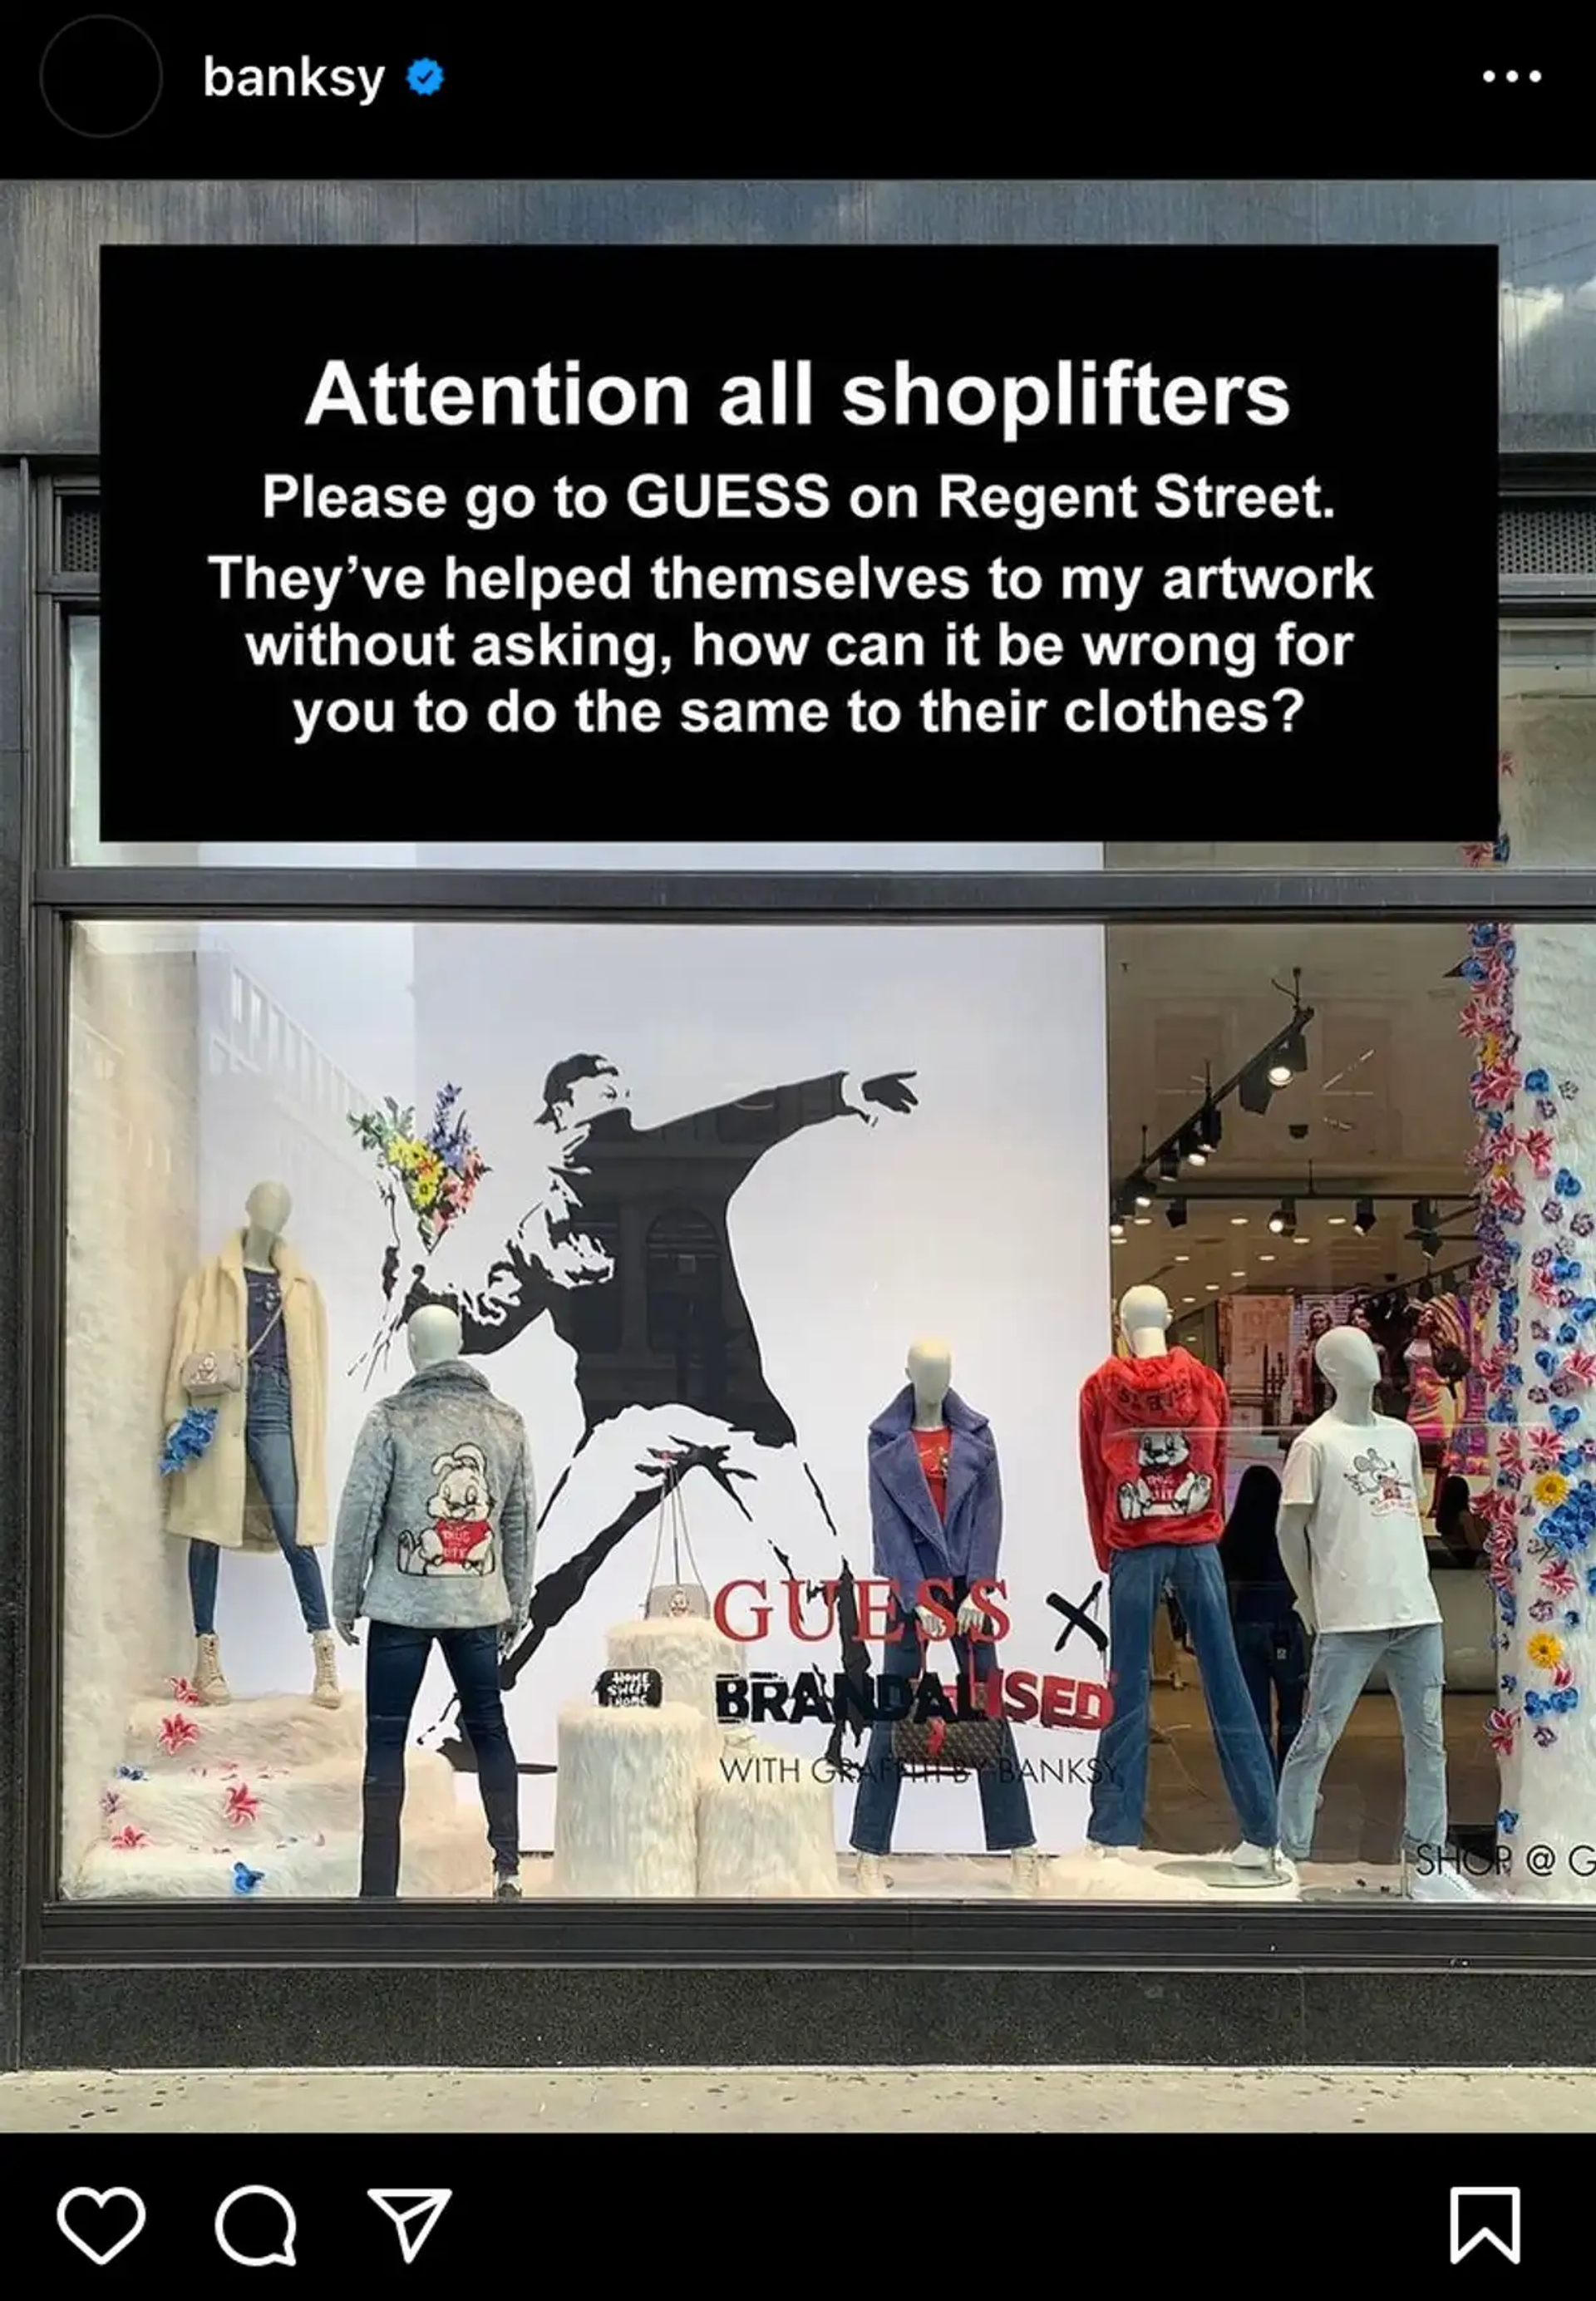 An image of an instagram post by Banksy. It shows the storefront of Guess on Regent's Street, featuring his motif Flower Thrower. Above it, Banksy encourages his followers to shoplift from the store.